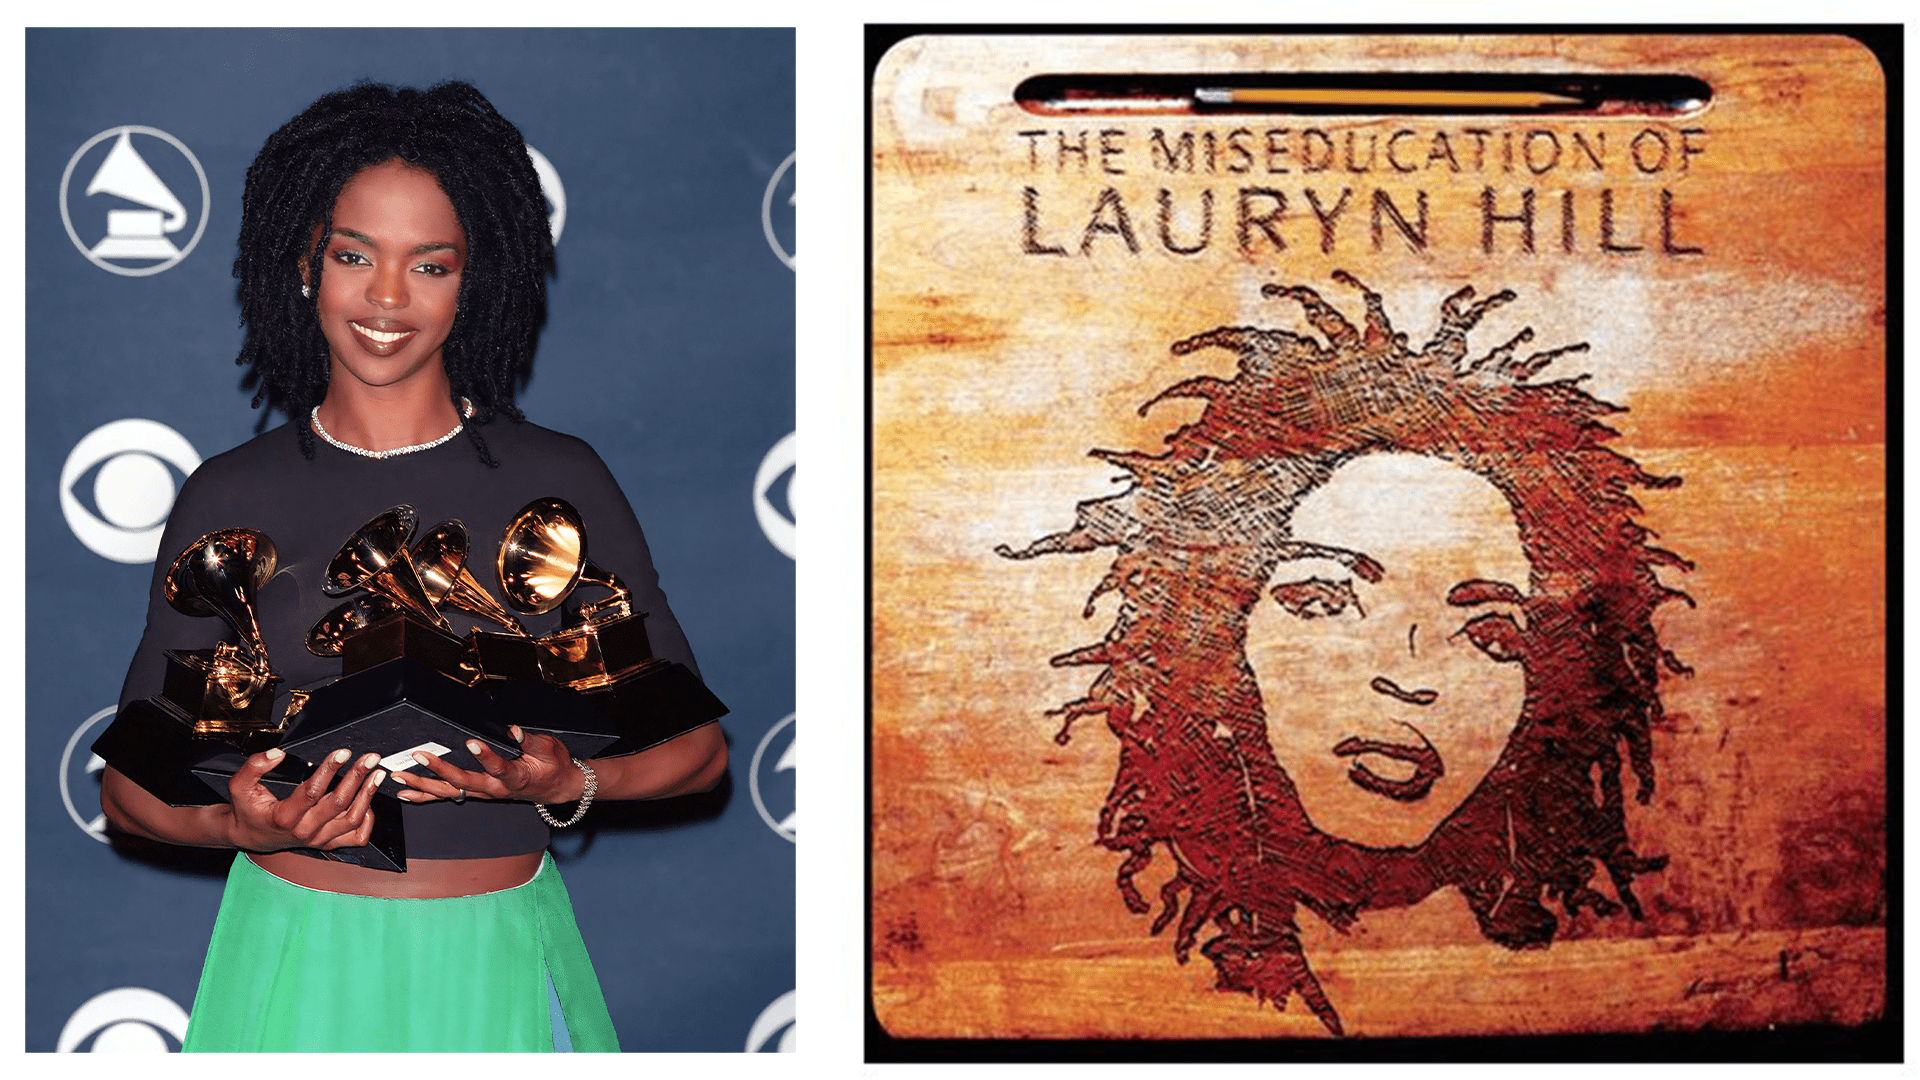 Lauryn Hill_Miseducation Album Cover. Credit by Getty/The Grammys/Columbia Records. Strictly for editorial purpose. No copyright infringement intended. 